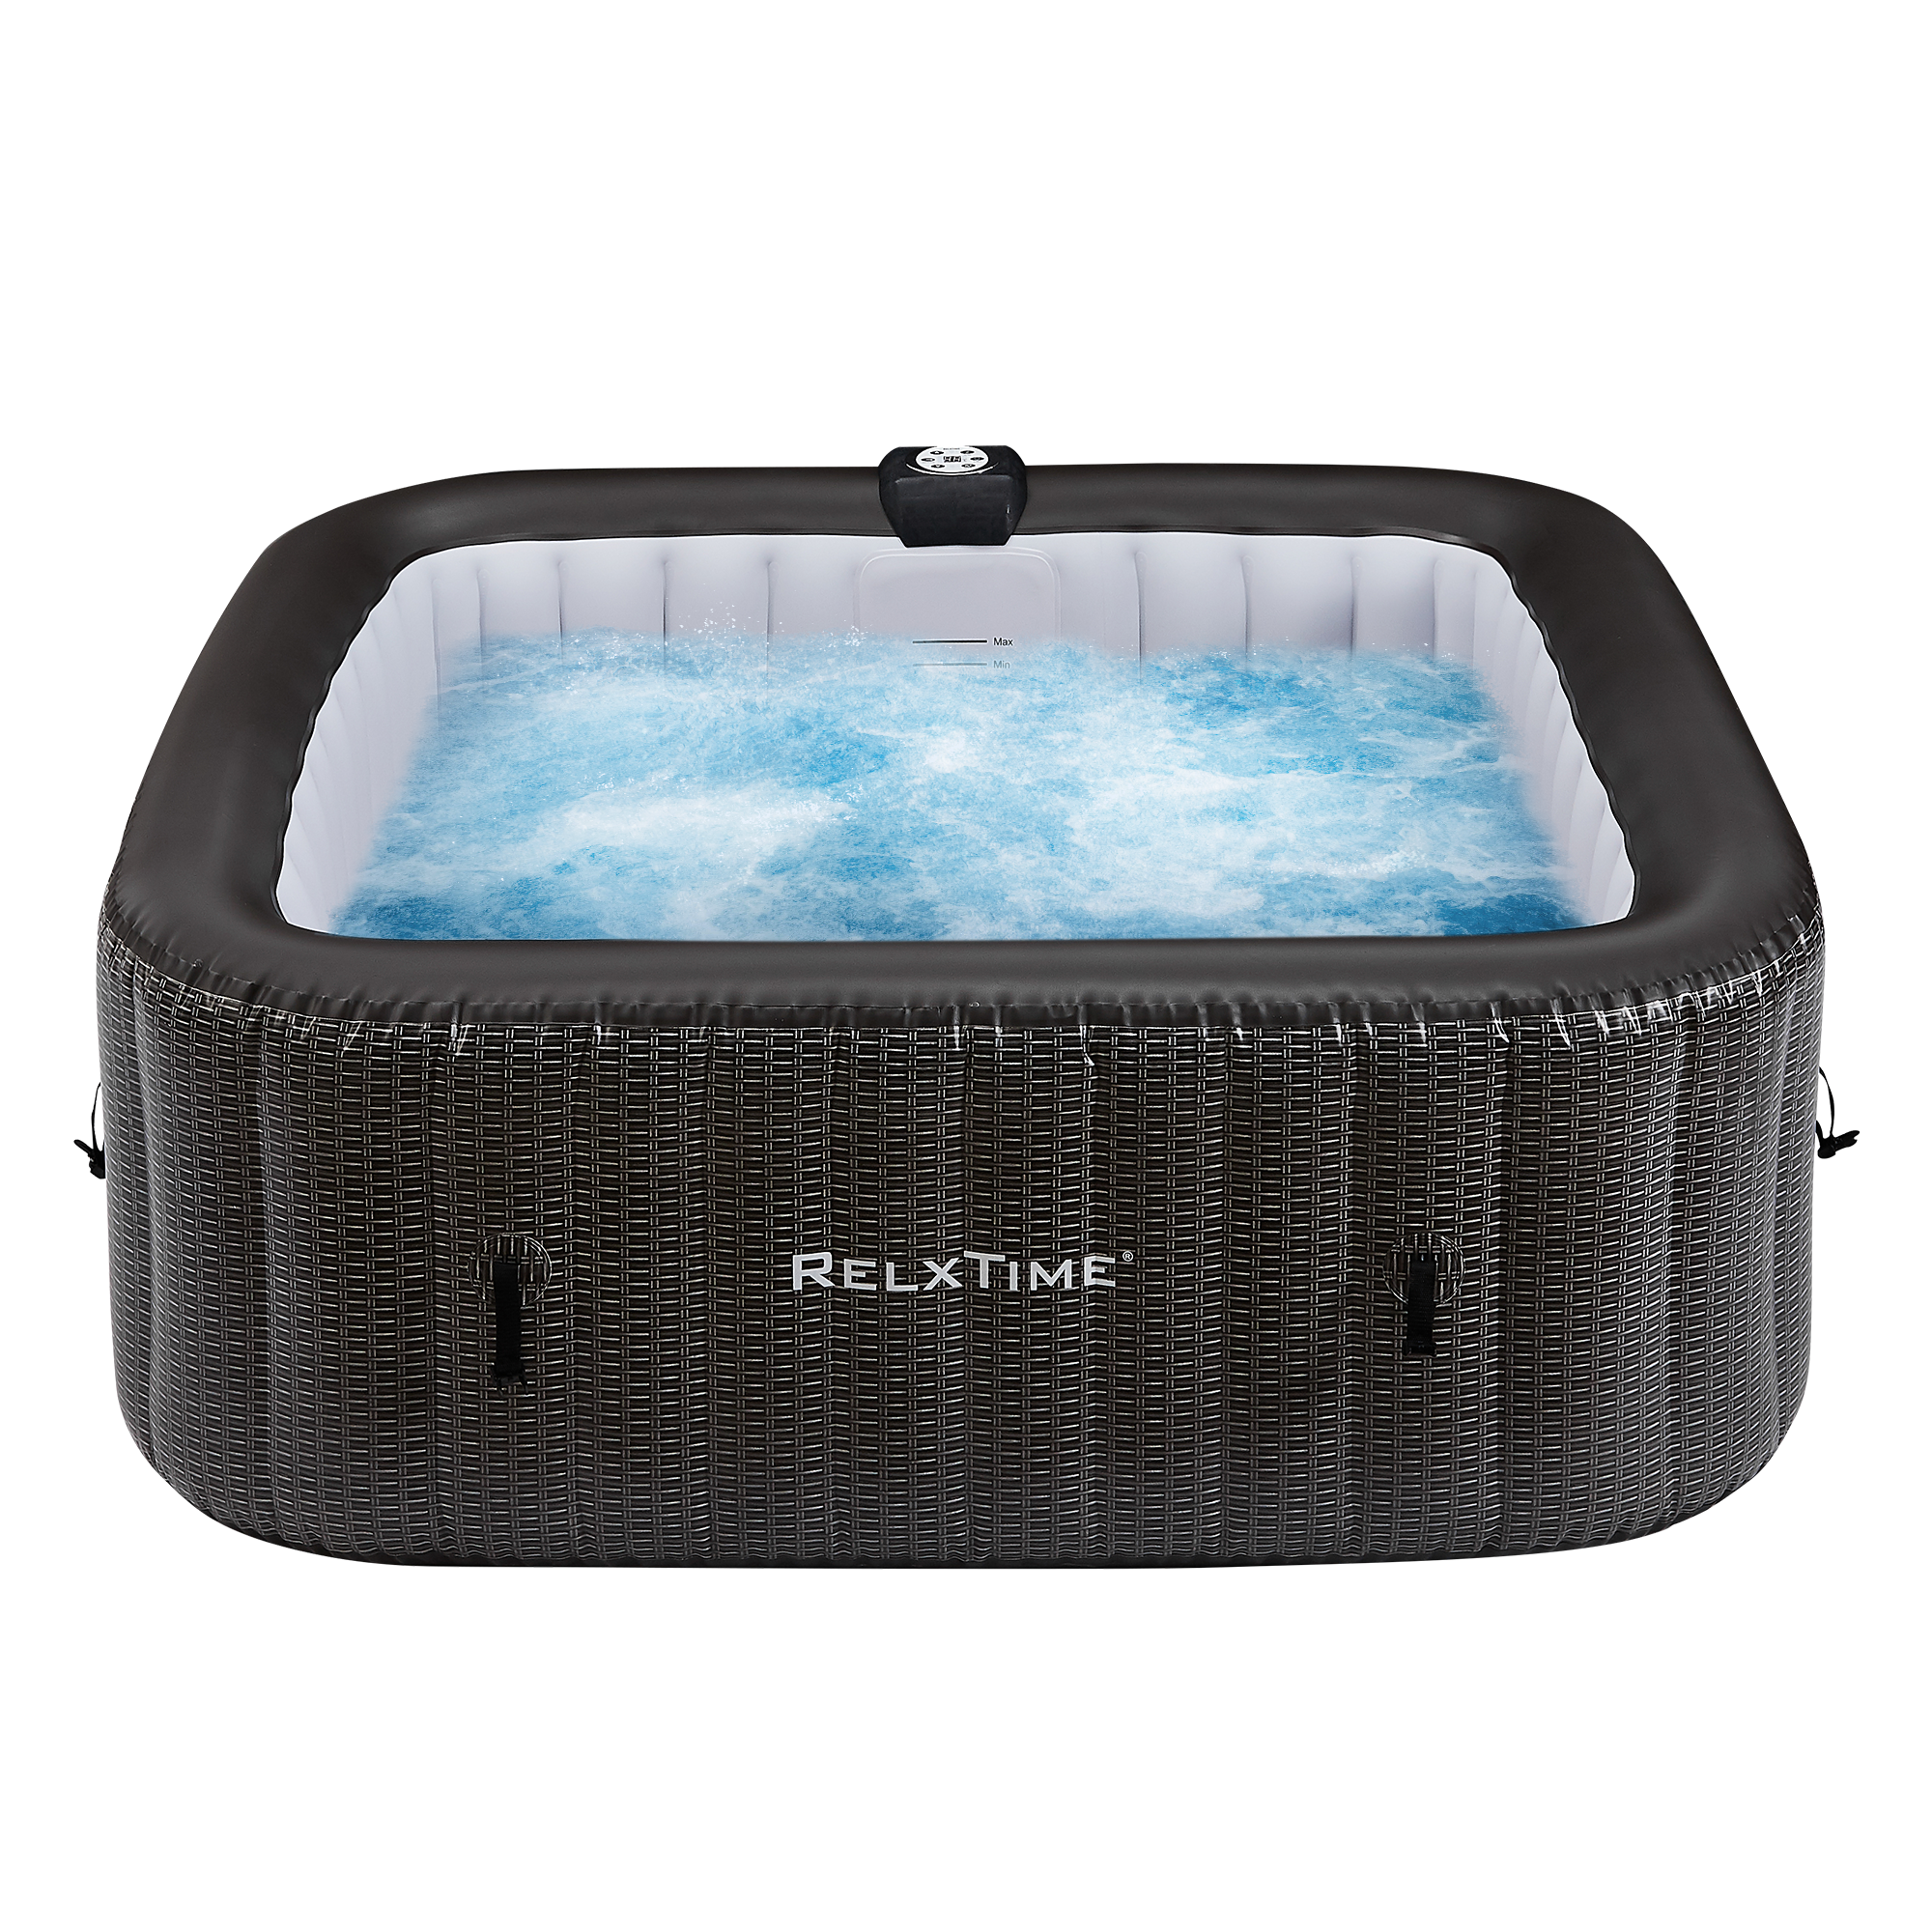 Relxtime 6 Person Square Inflatable Hot Tub 130 Massaging Air Jets Black Laminated Classic Spa